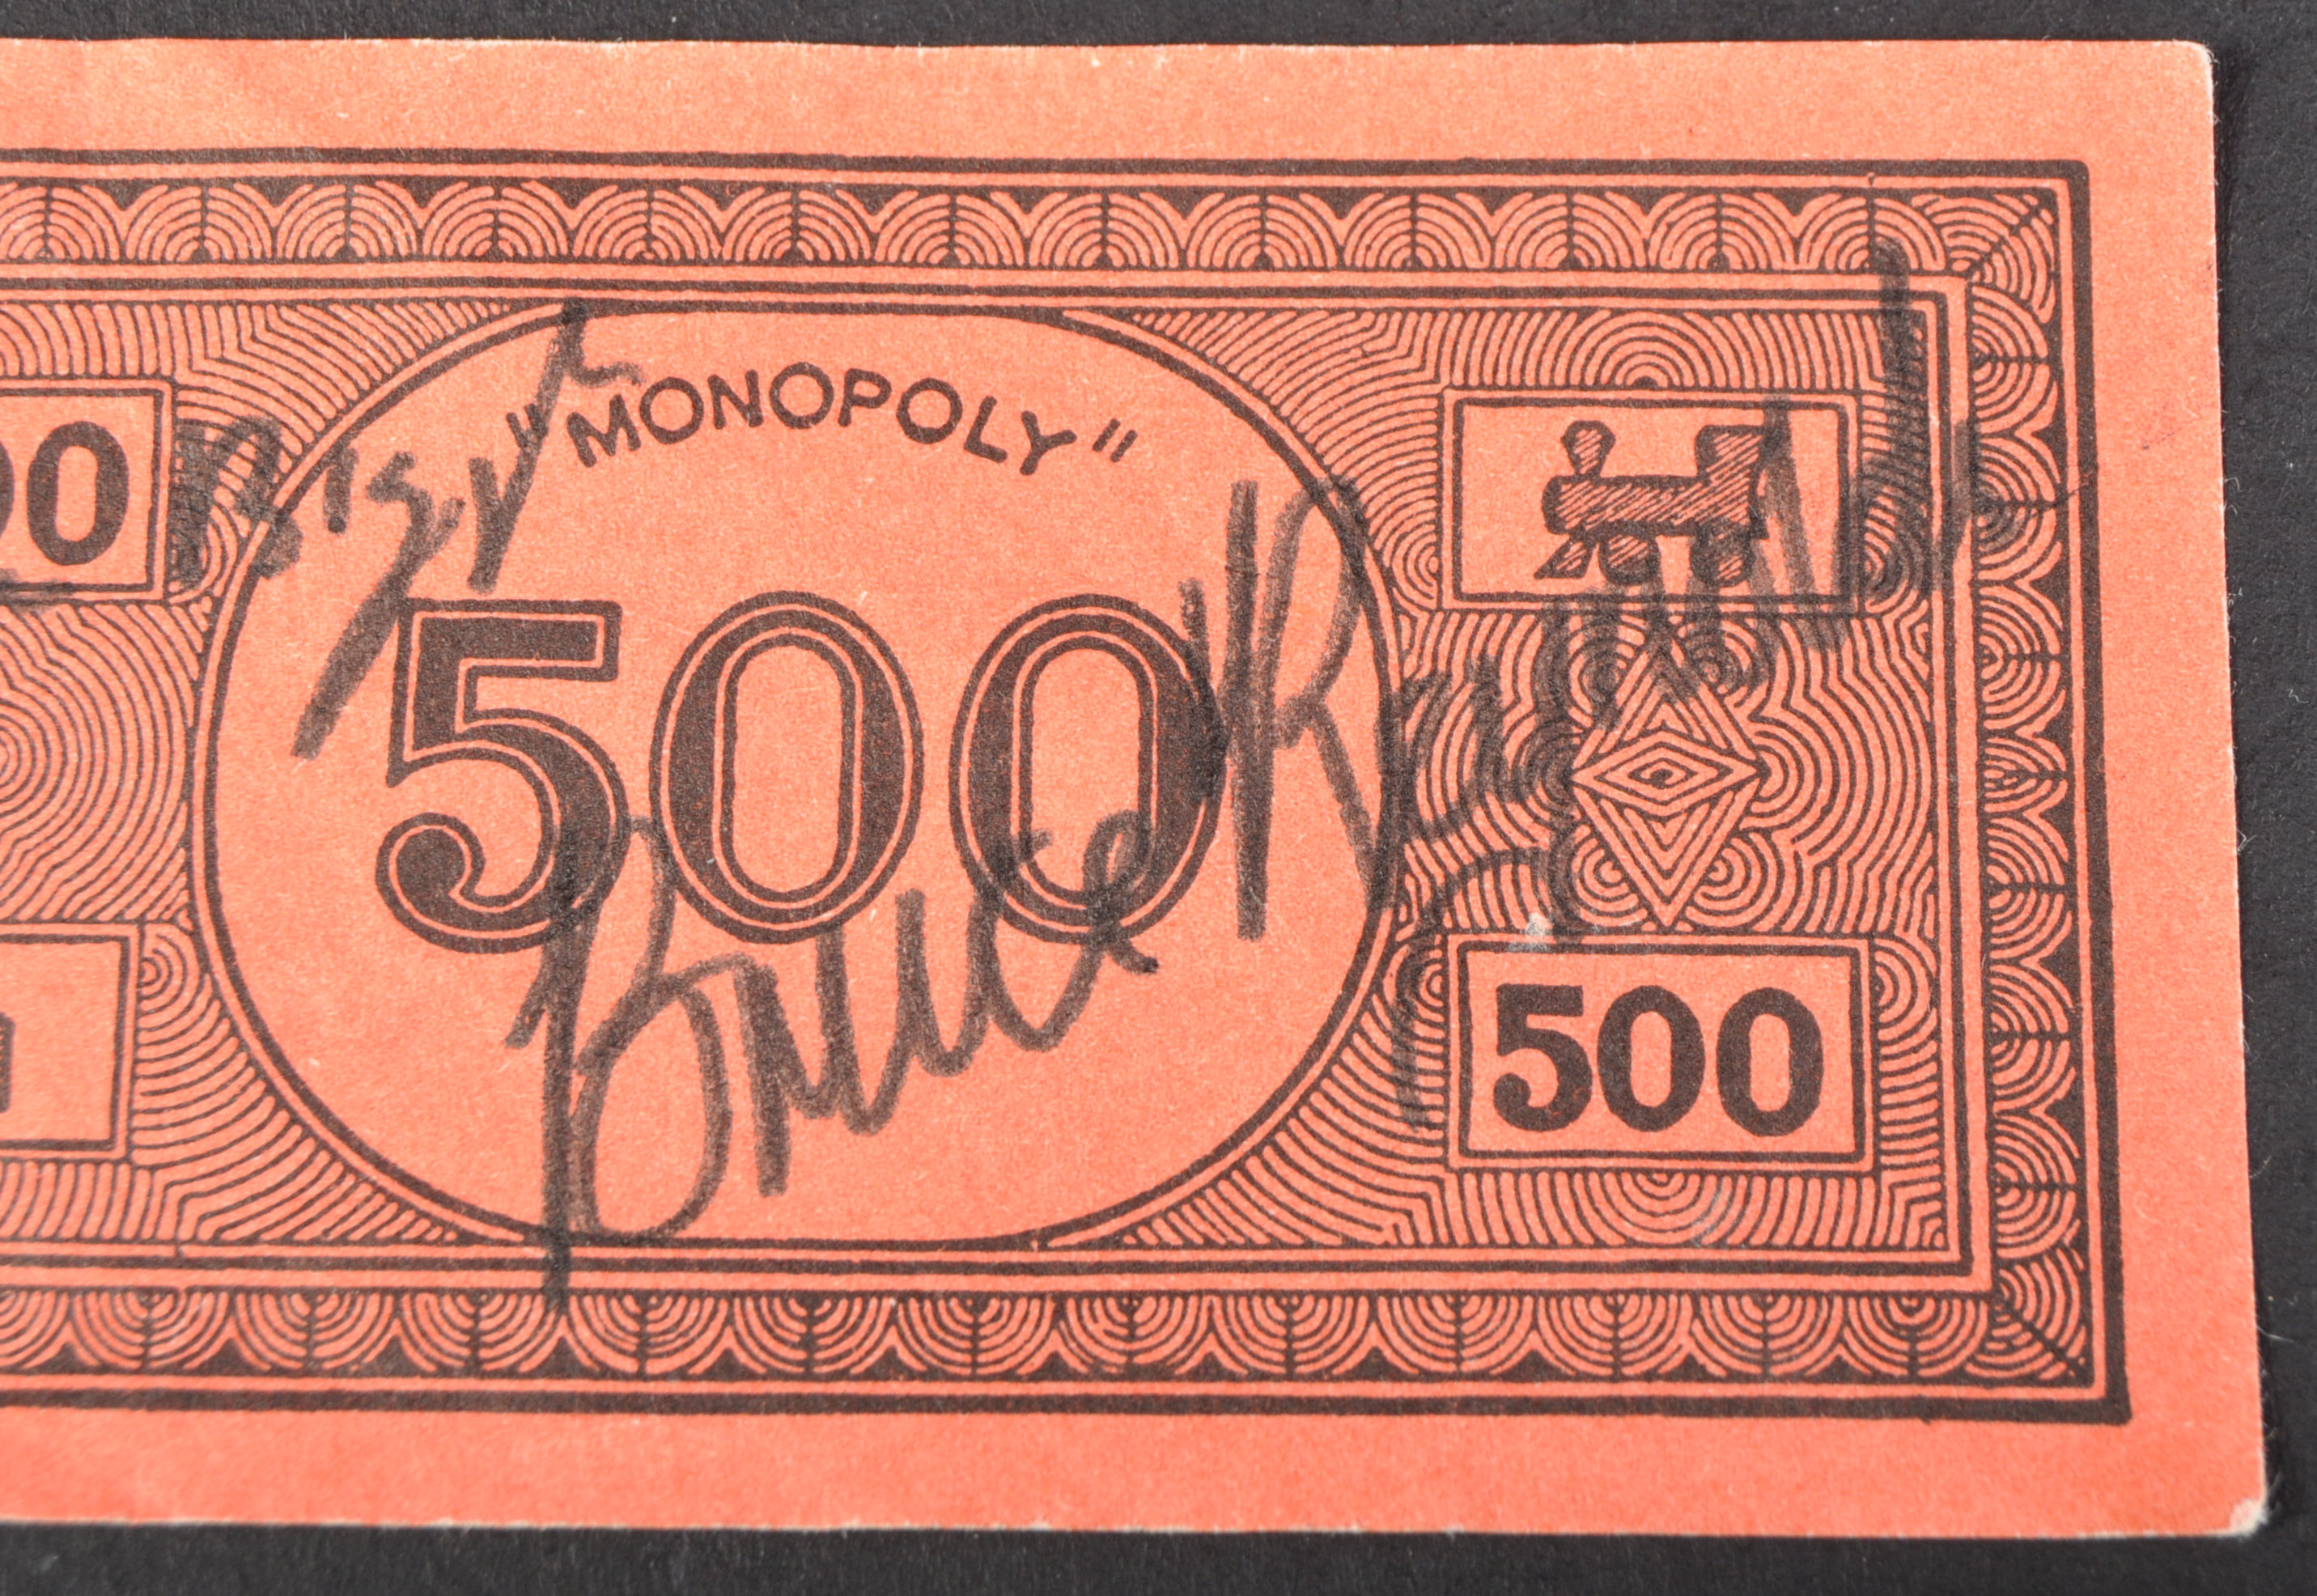 GREAT TRAIN ROBBERY - DUAL SIGNED MONOPOLY BANK NOTE - Image 3 of 3